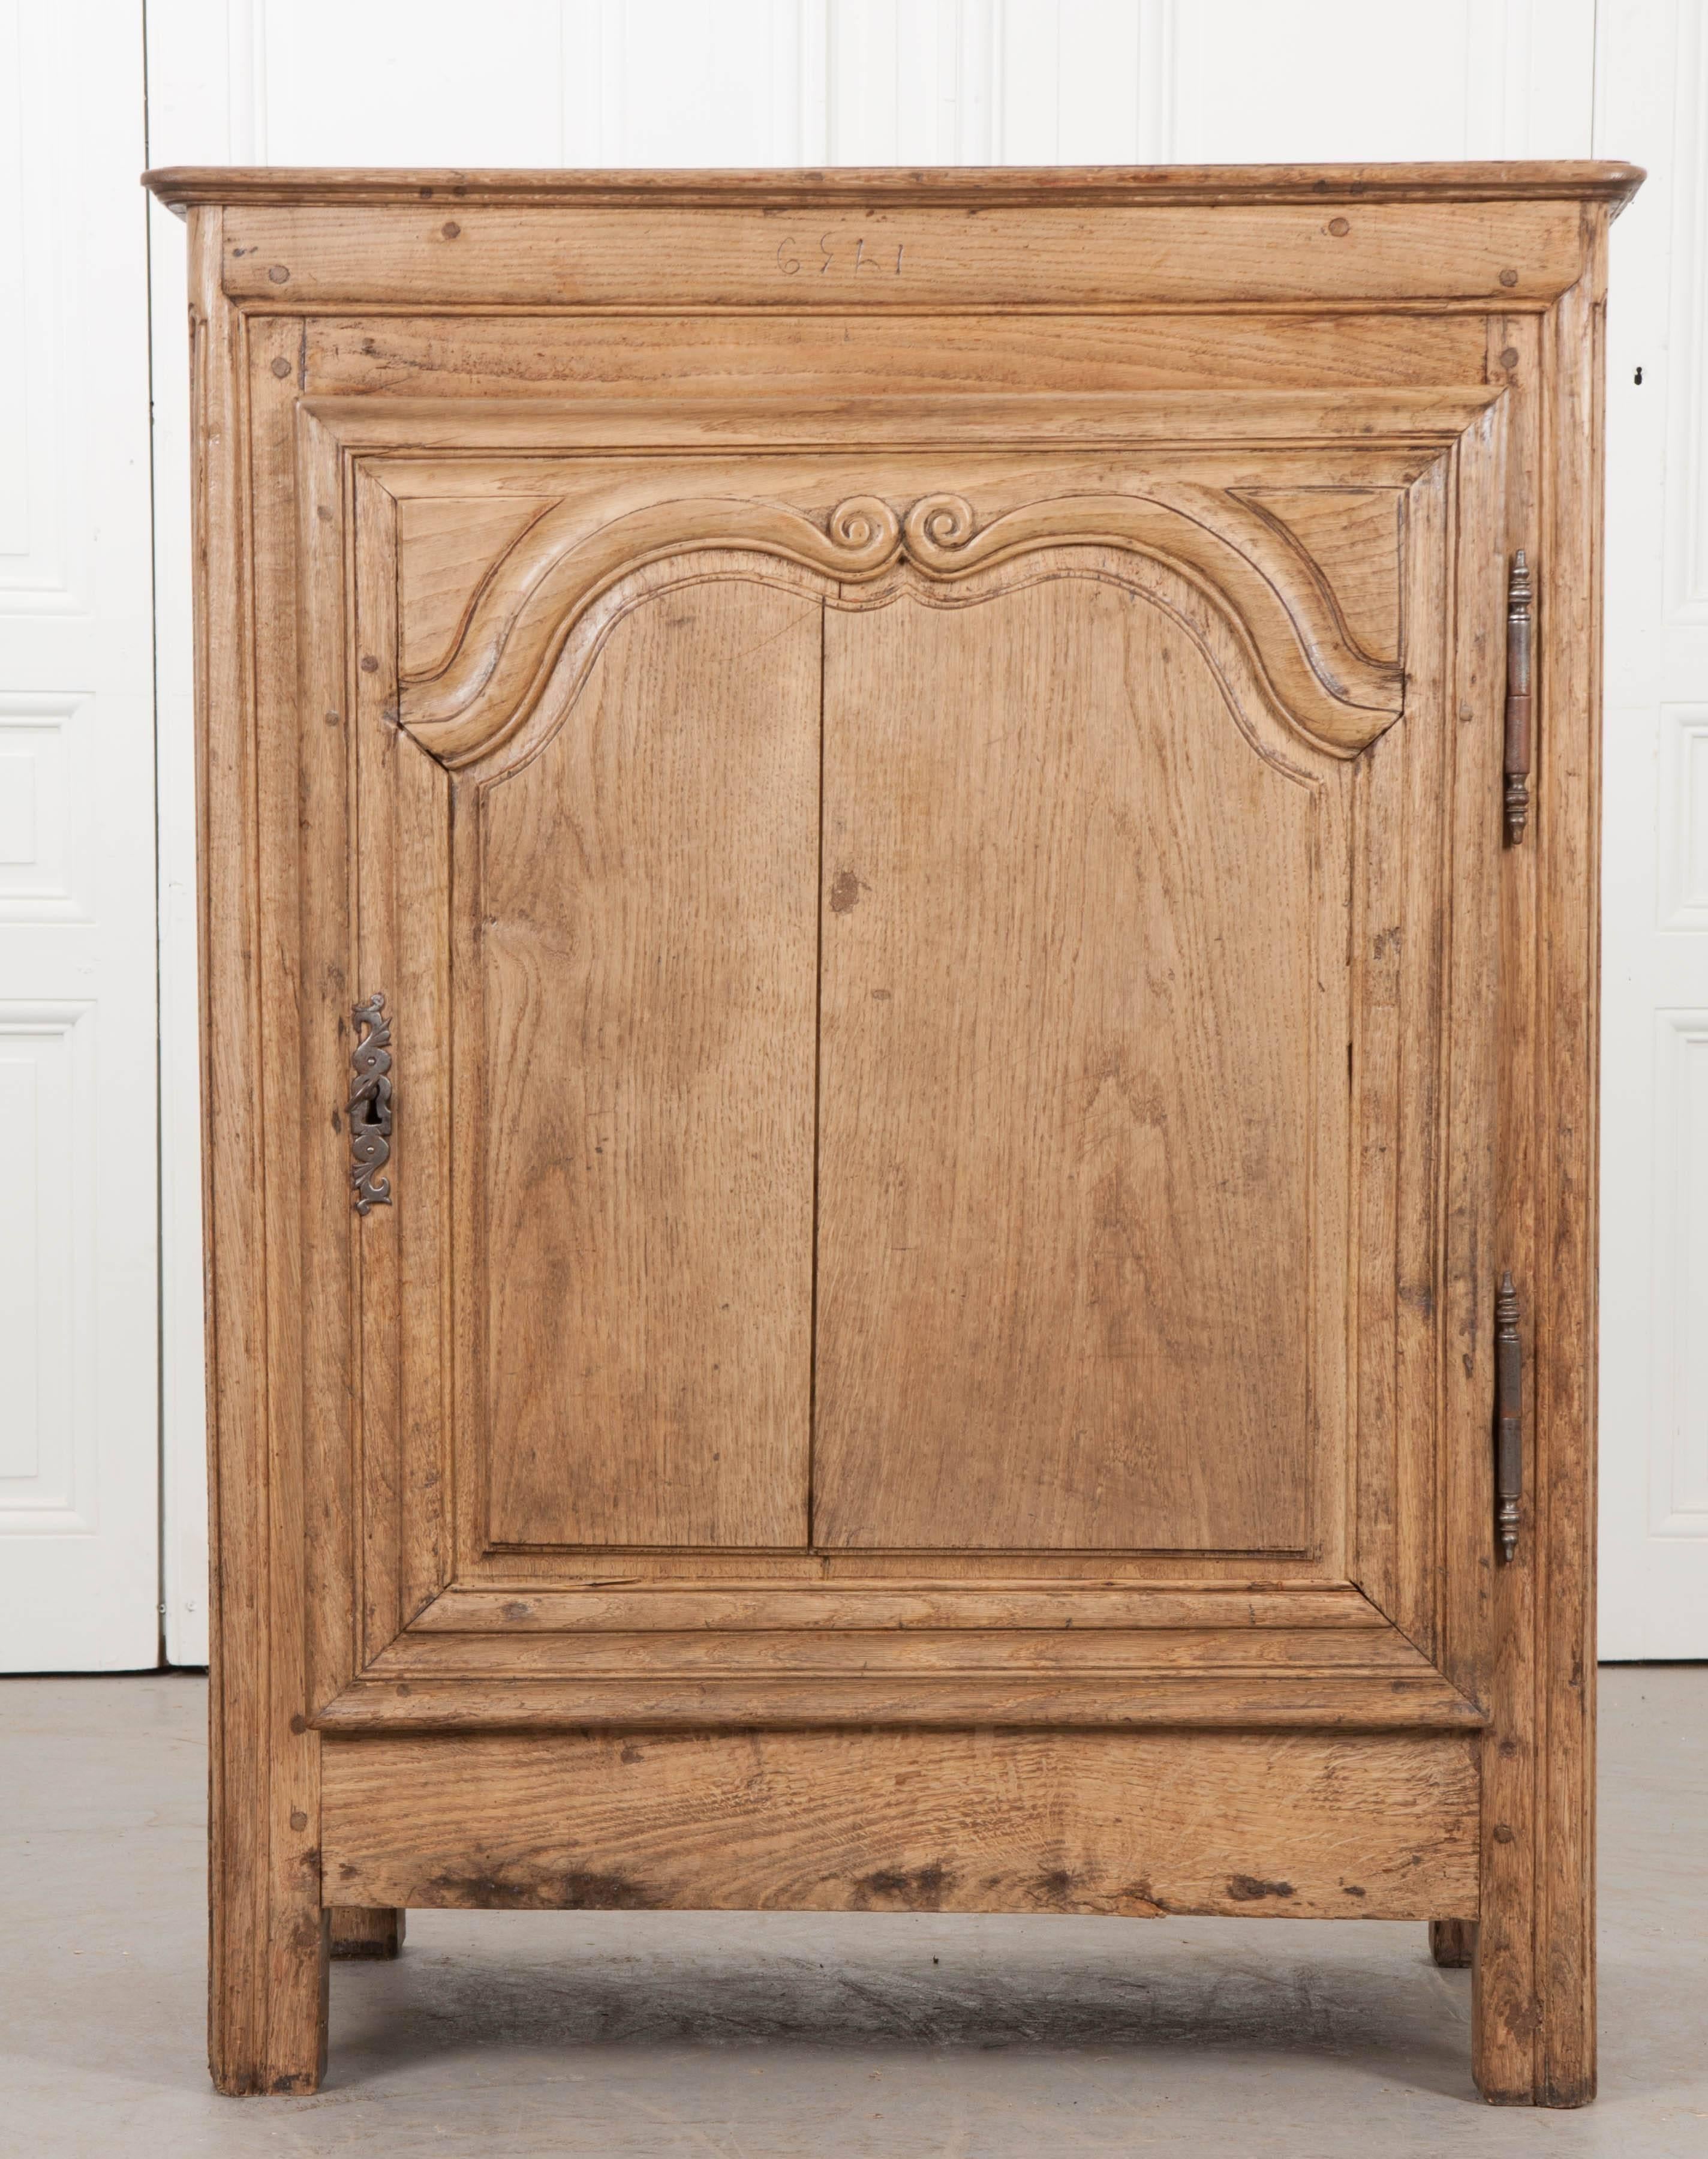 A fantastic single-door oak buffet, made in France, circa 1820. The tall cabinet was made using solid oak, which is blonde in color, and fastened together using peg joinery. The lightly toned wood exposes the beautiful grain which is sometimes less